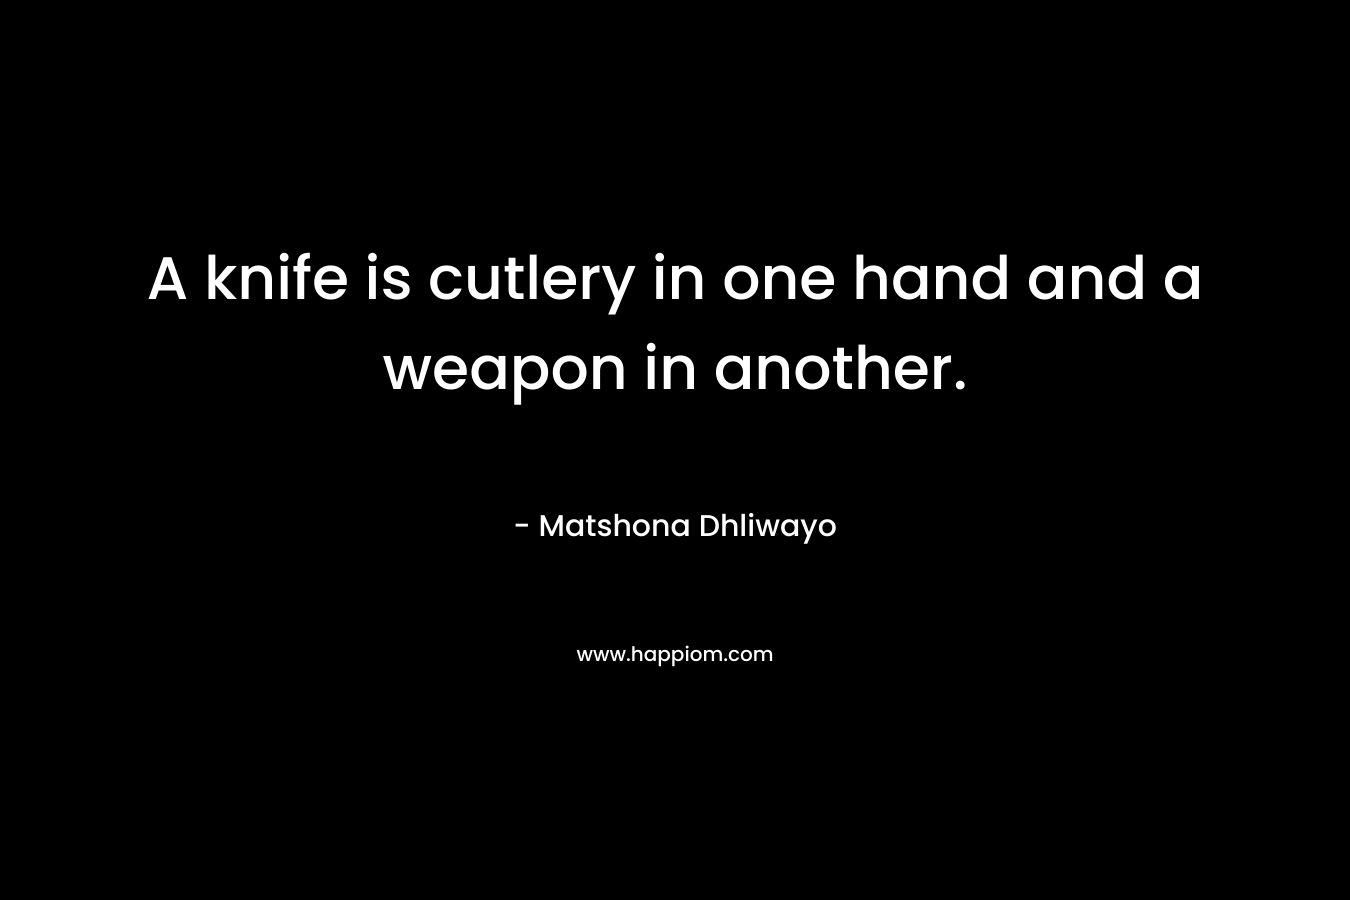 A knife is cutlery in one hand and a weapon in another.